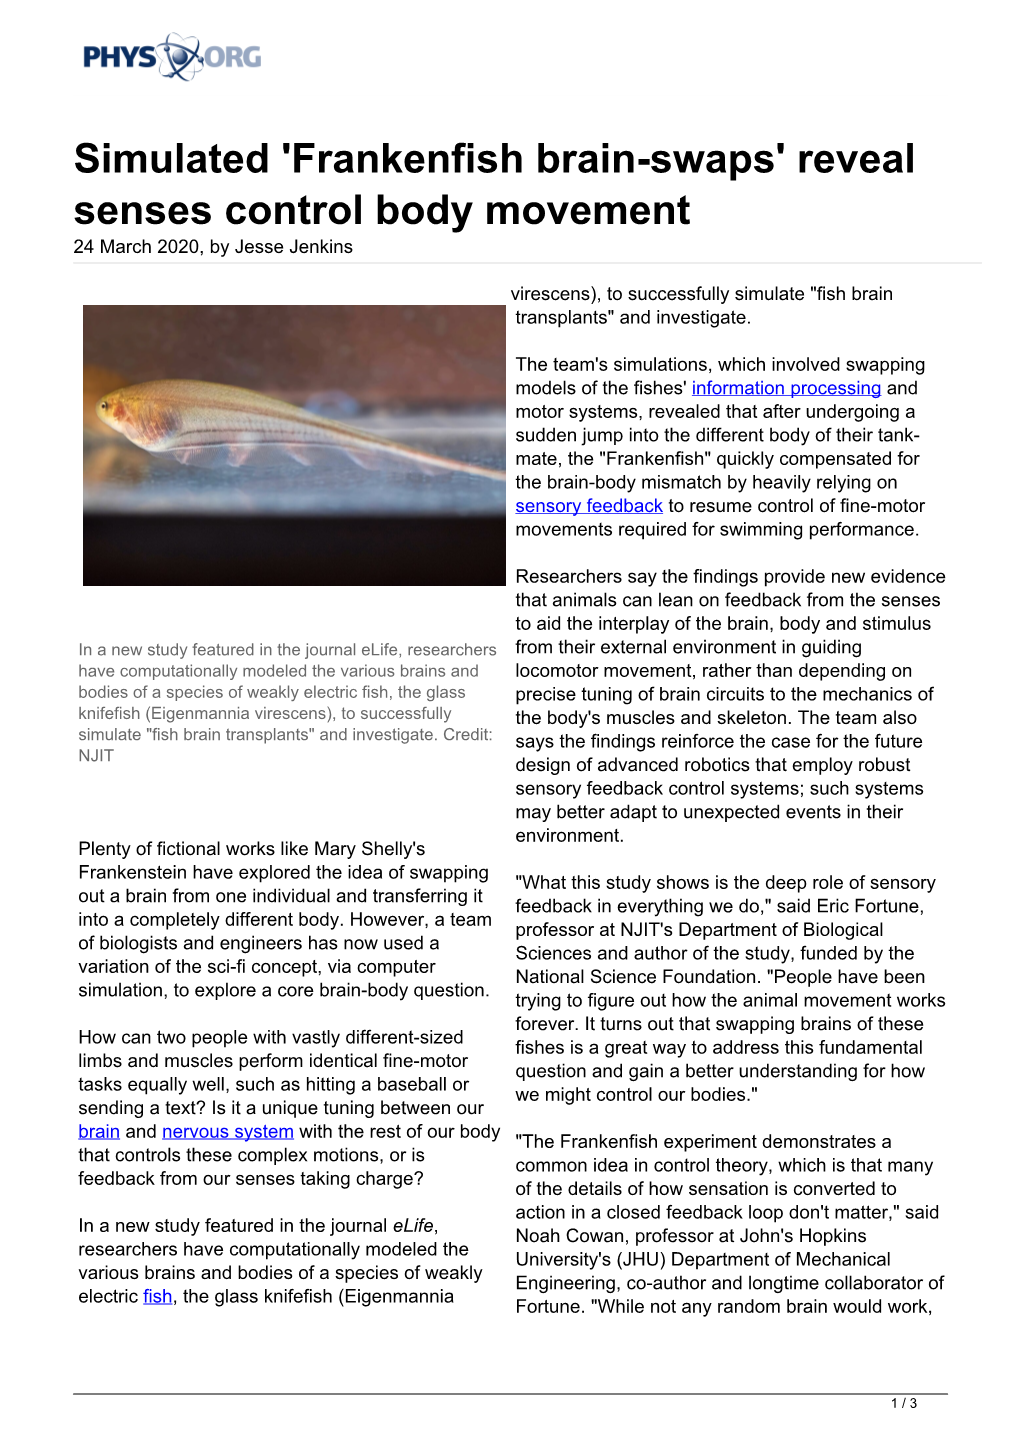 Simulated 'Frankenfish Brain-Swaps' Reveal Senses Control Body Movement 24 March 2020, by Jesse Jenkins